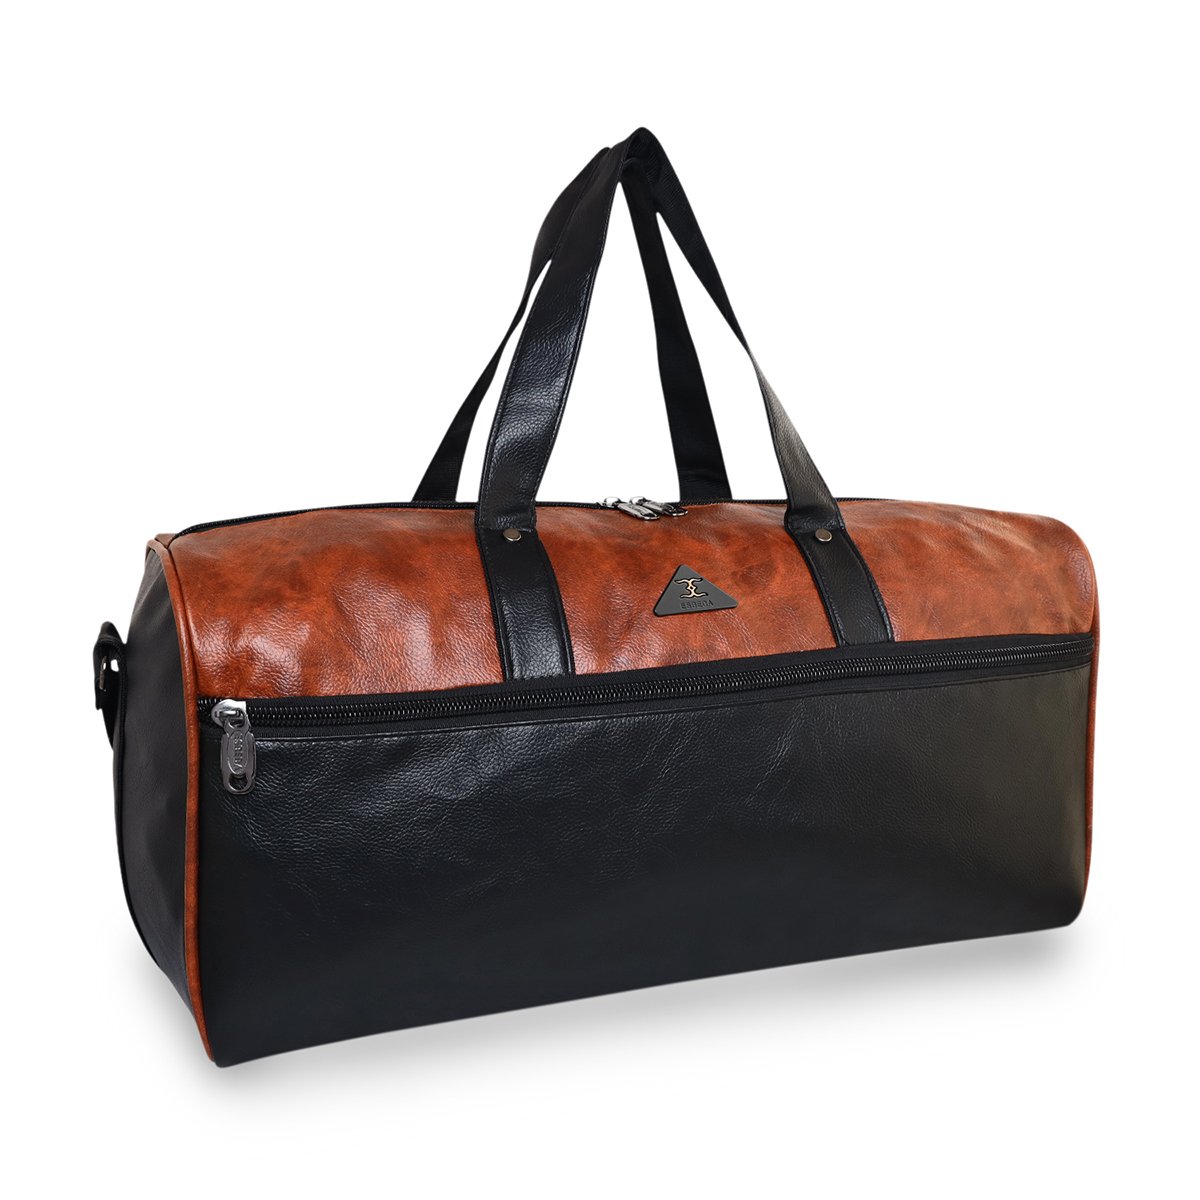 ESBEDA Luggage, Briefcases & Trolleys Bags for Men sale - discounted price  | FASHIOLA INDIA